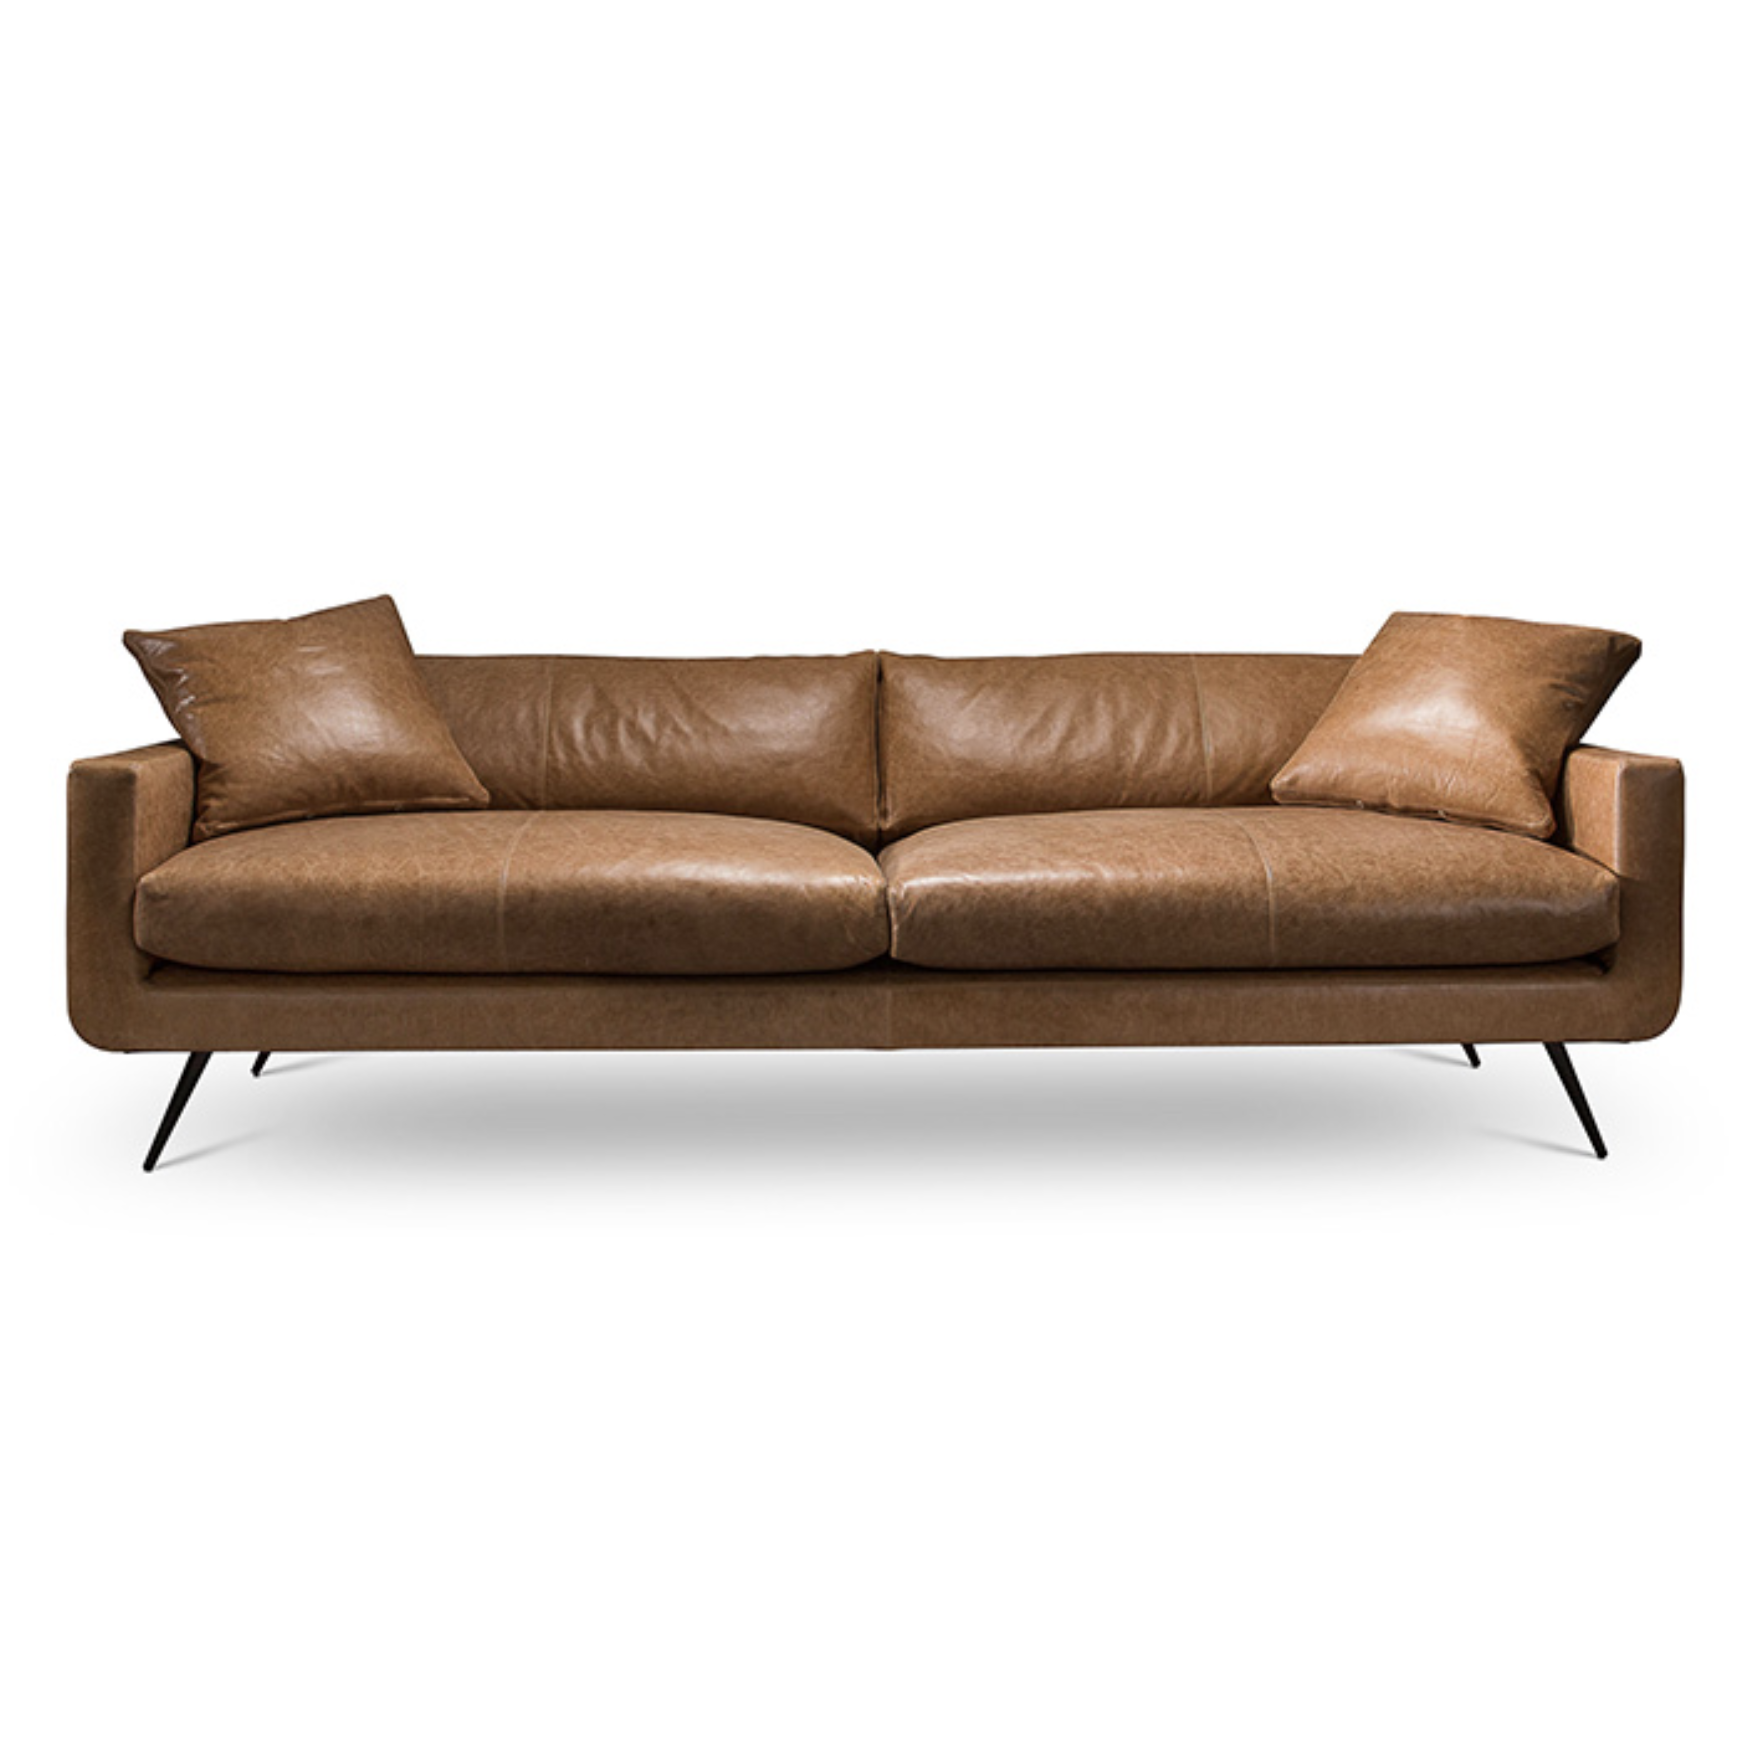 Instantly a modern classic, the Stella Sofa Family by Verellen is made with a sustainably harvested hardwood frame and 8-way hand-tied seat construction. It comes standard with:  • Spring Down Seat Construction • Boxed Back Pillows • Loose Bullnose Style Dual Seat Cushion • Boxed Toss Pillows • Center Seam on Front Rail • Double Needle • 8”H Metal Conical Leg with Black Matte Finish • Slipcover Not Available • Available as a Sectional